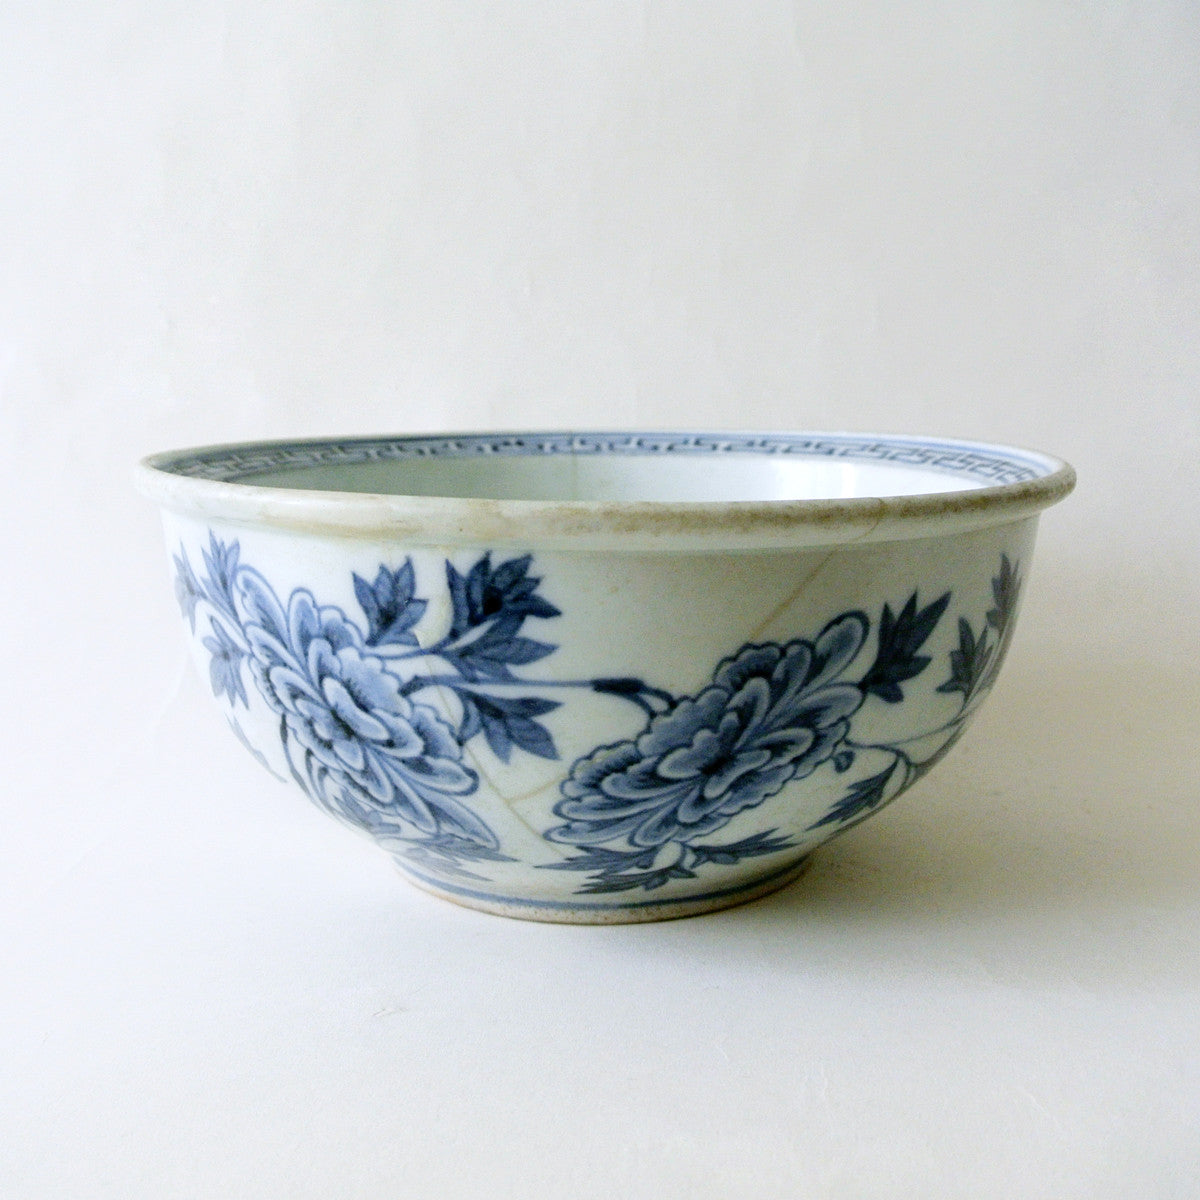 Large Blue and White Bowl with Peony Design from Chosun Period